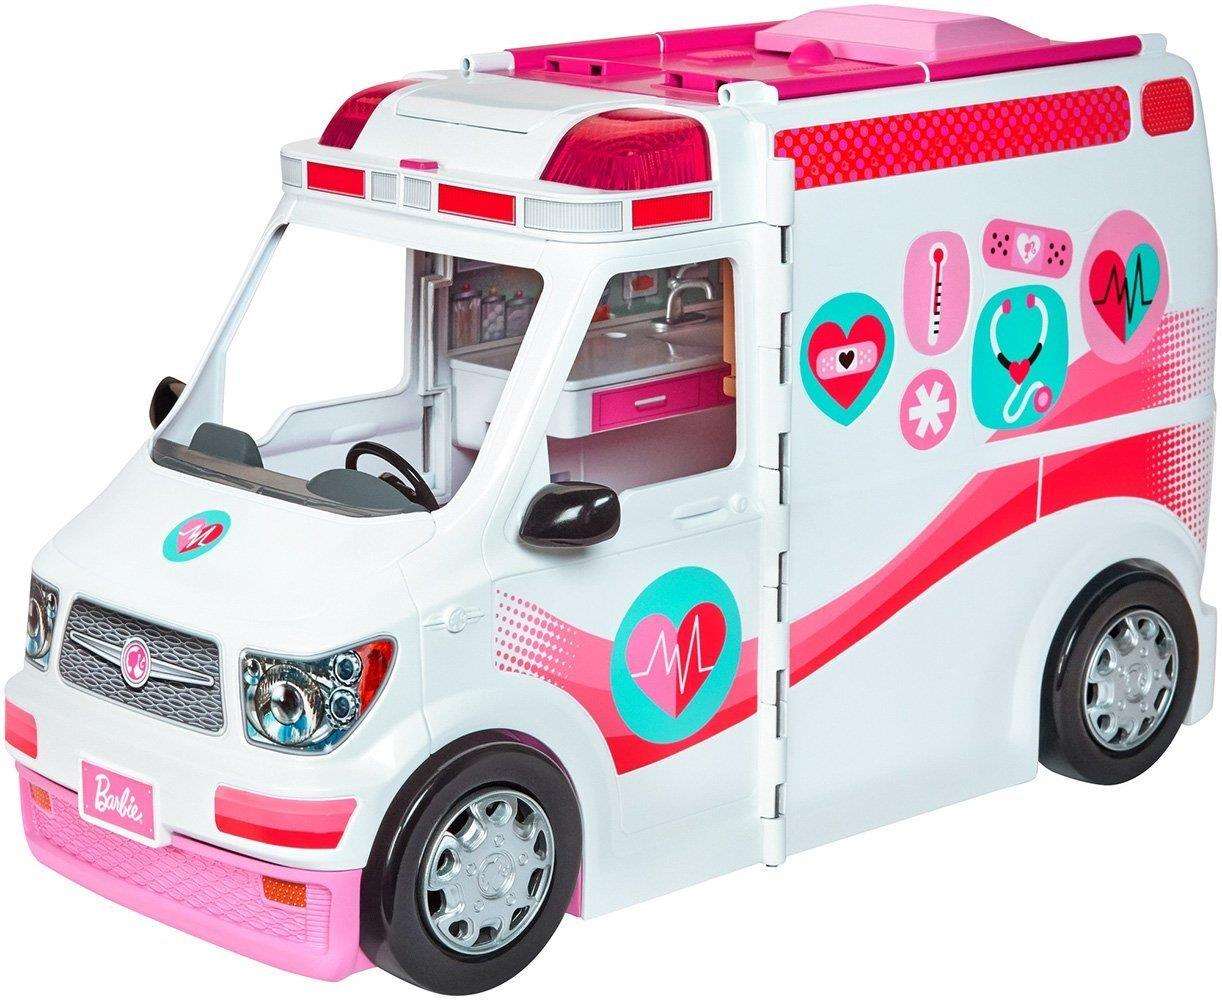 Barbie toys once again appear in a top Christmas toys list